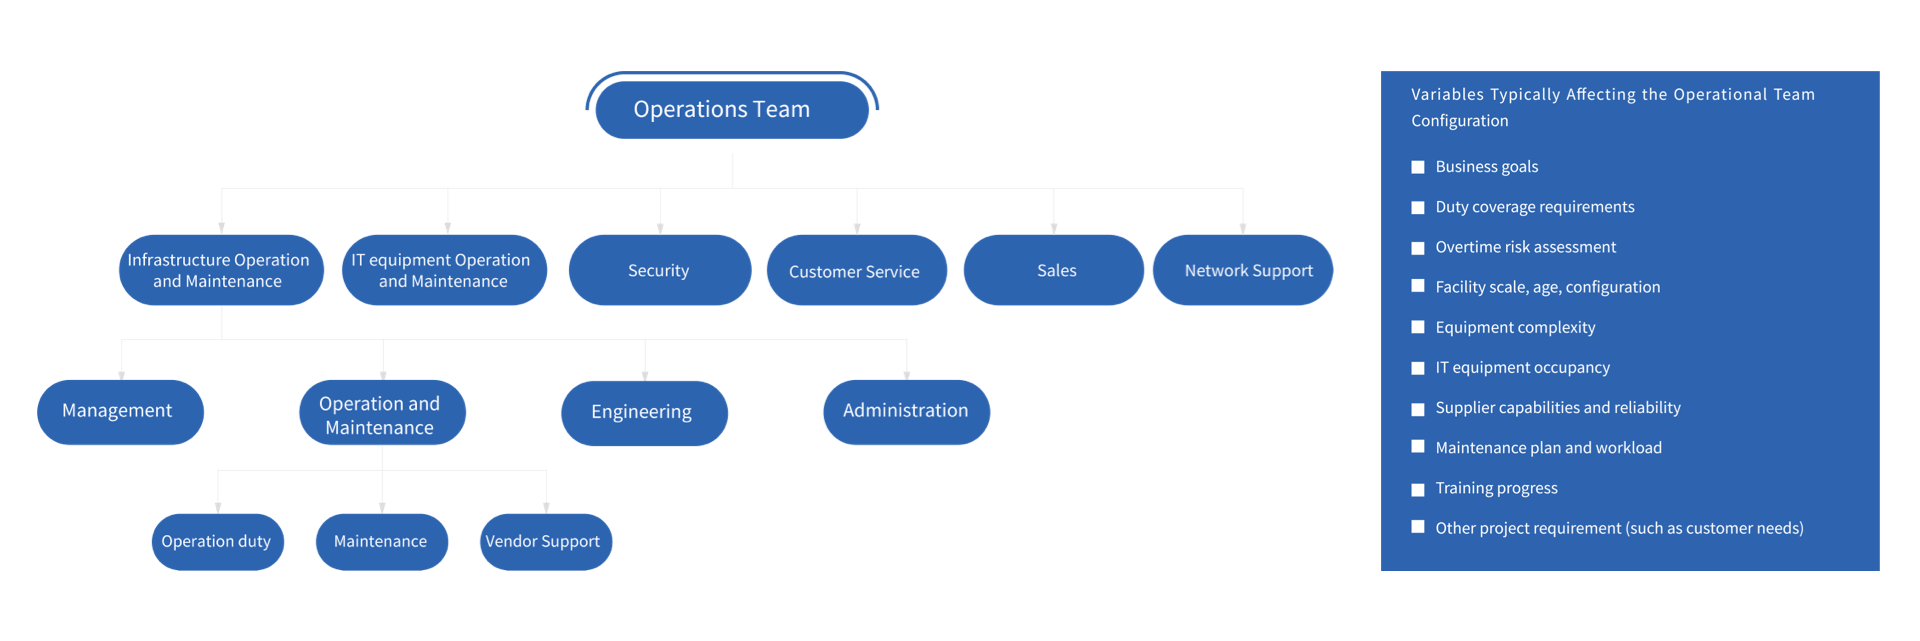 06-Operation Service-01-Facility Management-01.png